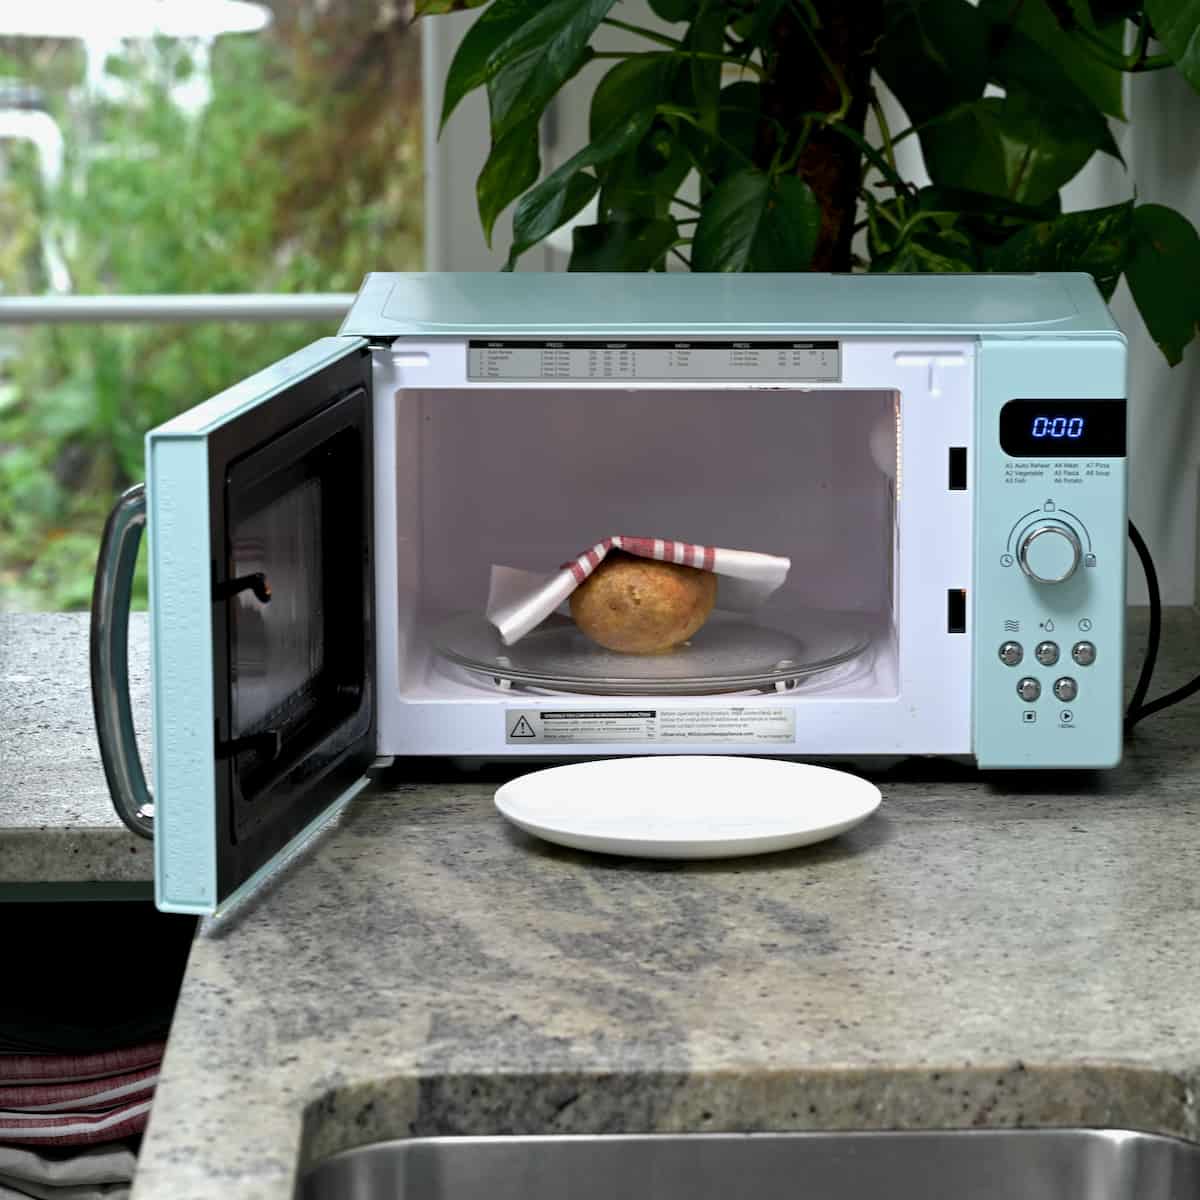 Using a towel remove the baked potato from microwave